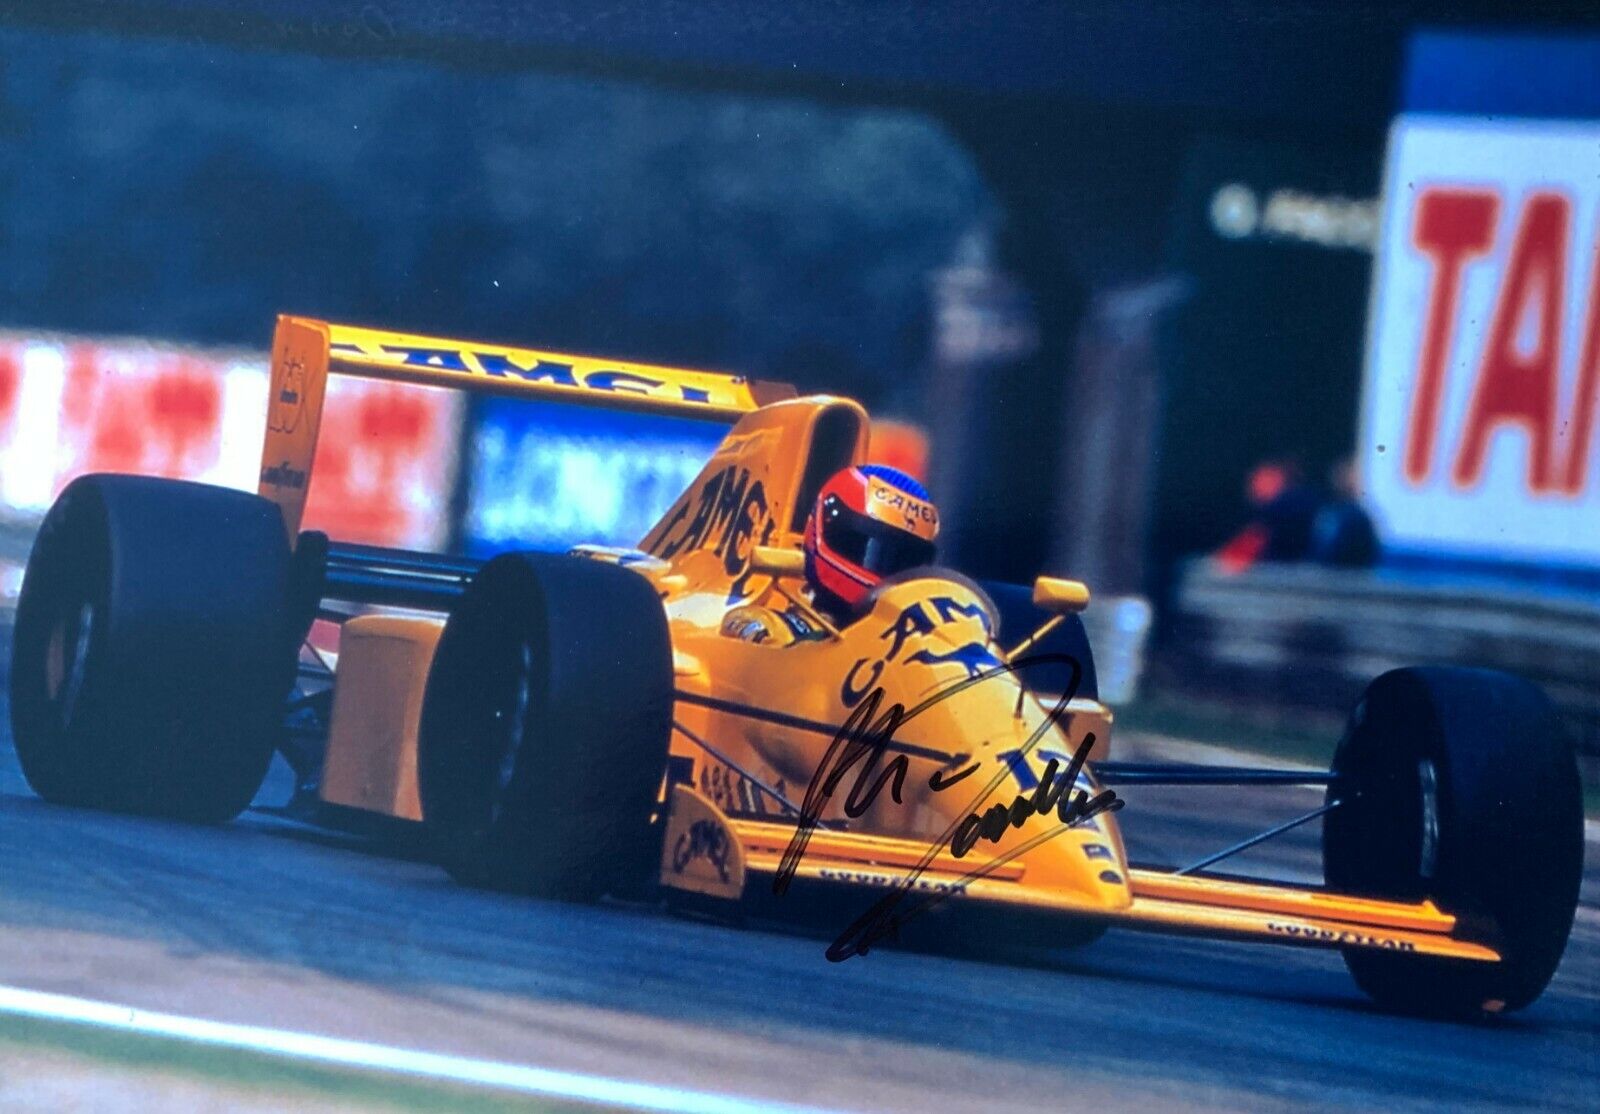 Martin Donnelly Camel Team Lotus Hand Signed Autograph F1 Jordan Arrows Nismo